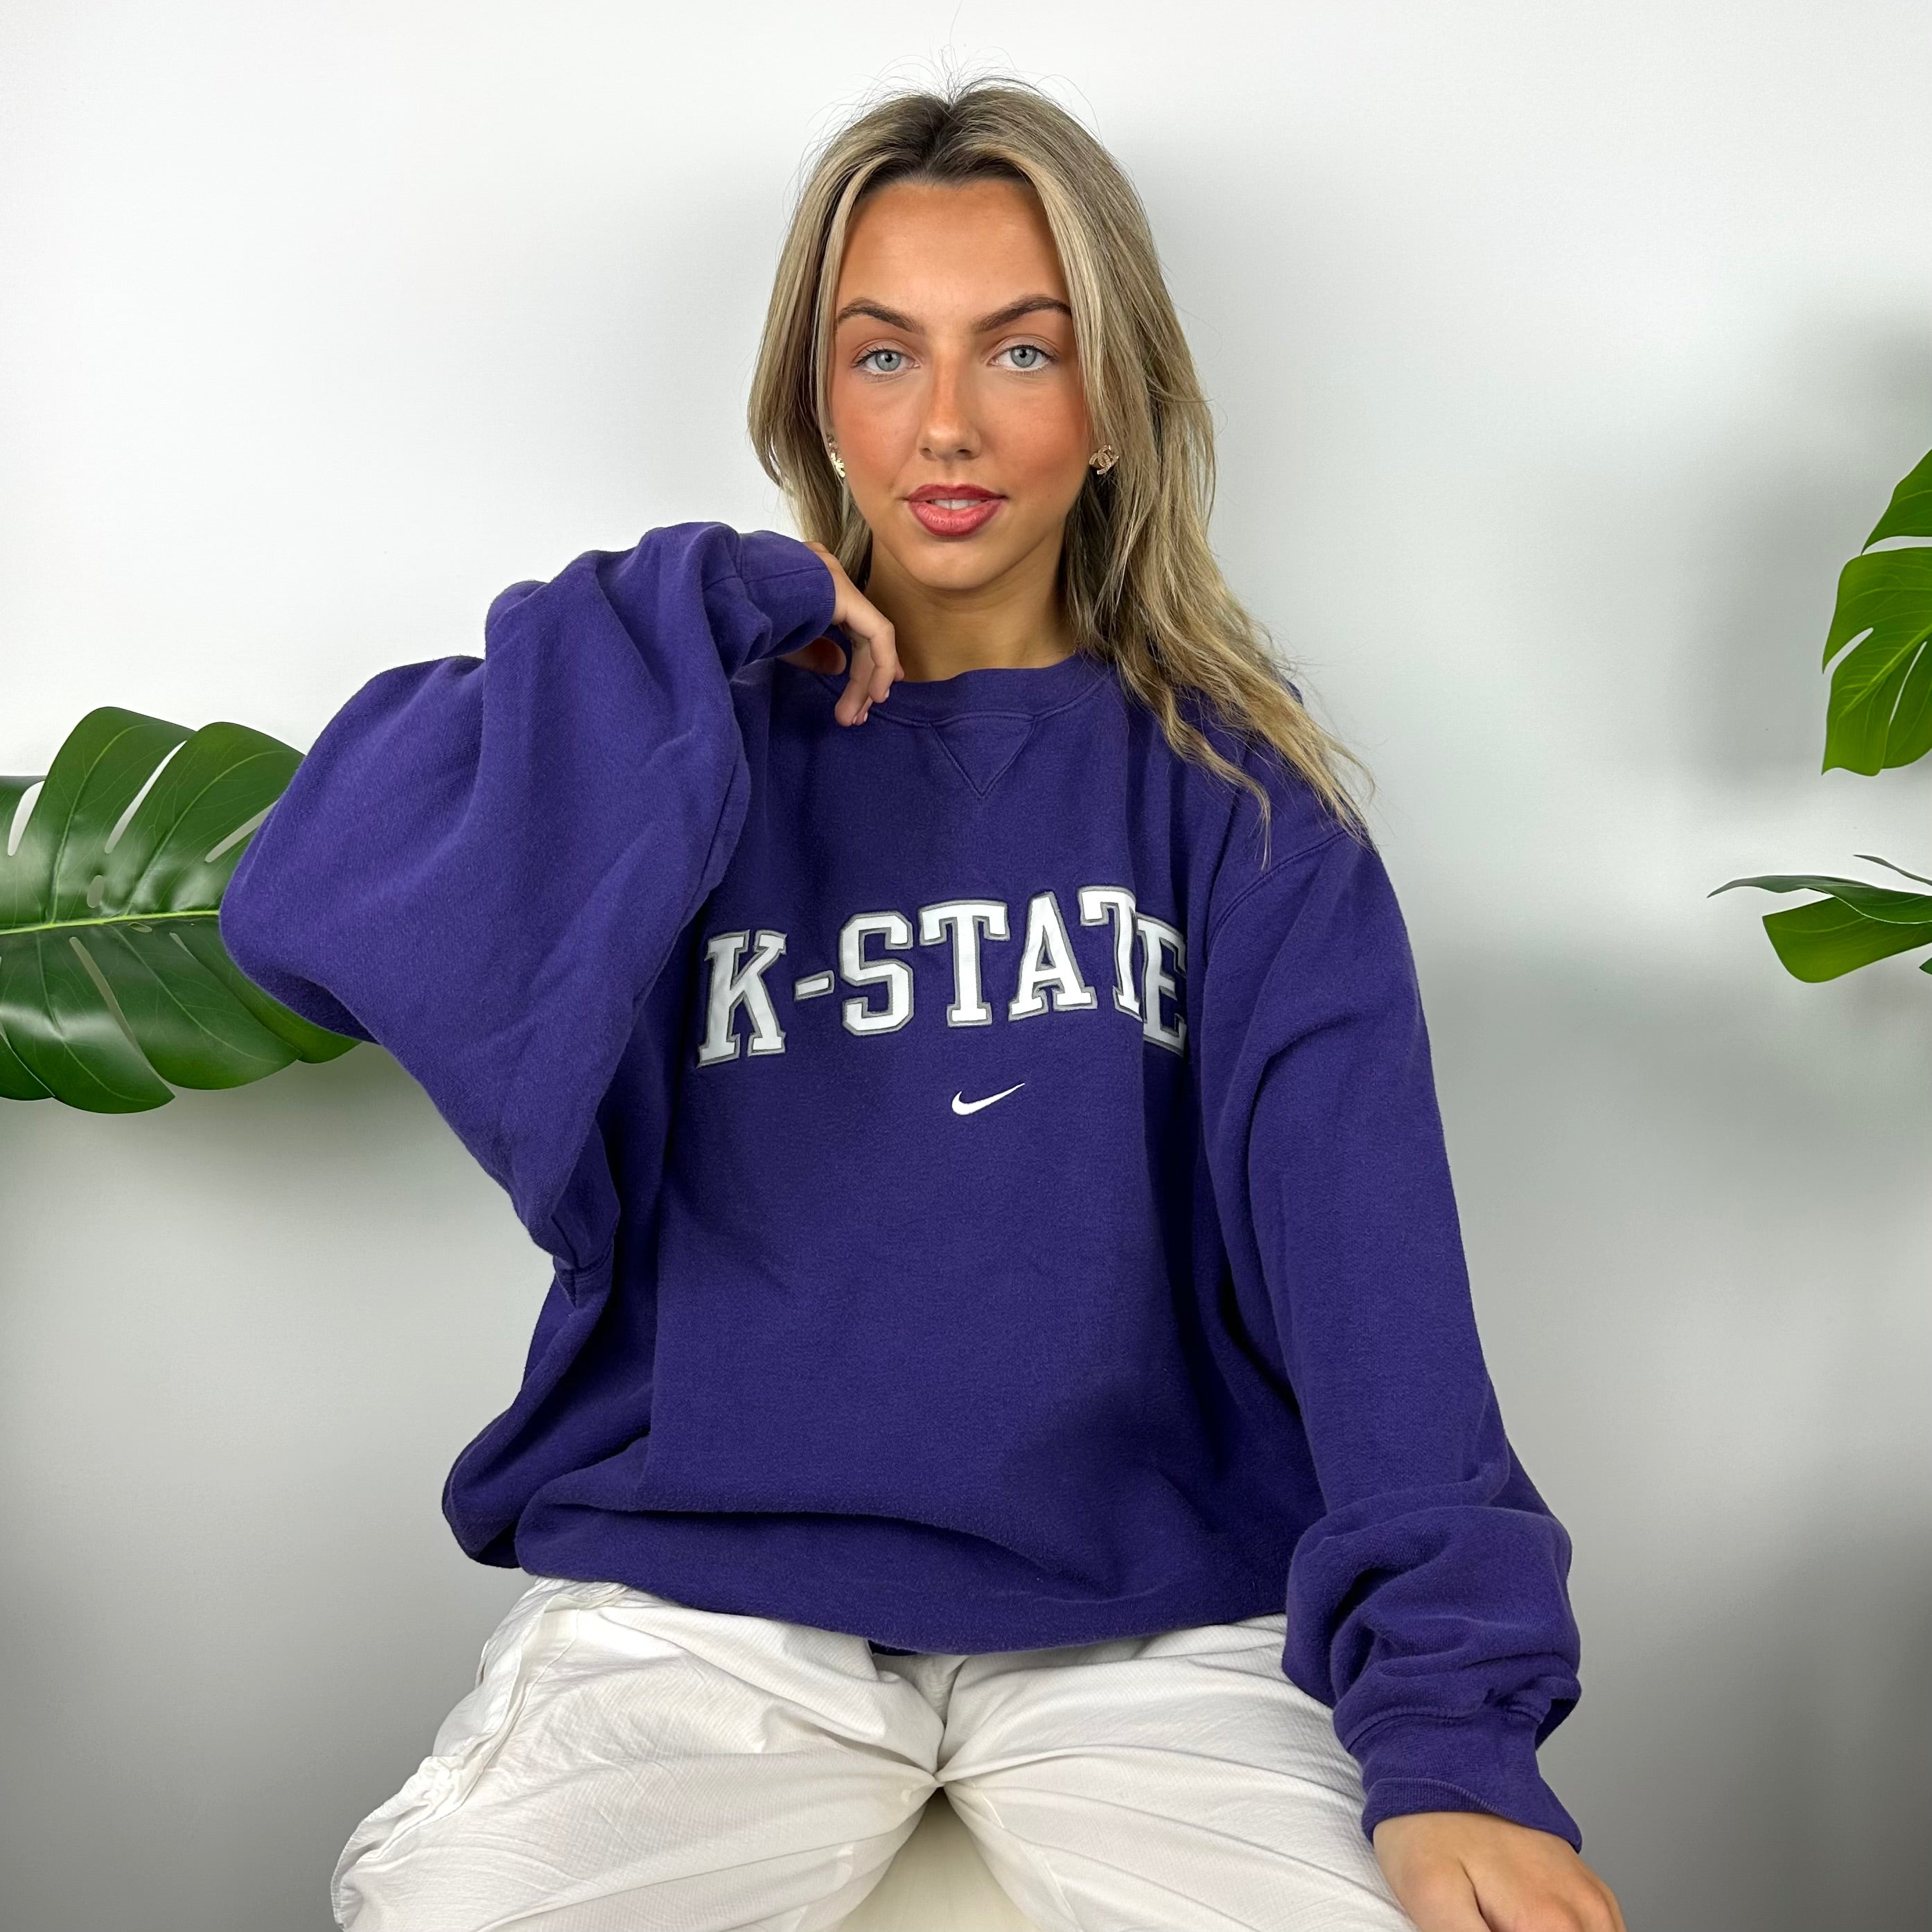 Nike x K State Purple Embroidered Spell Out Sweatshirt (M)